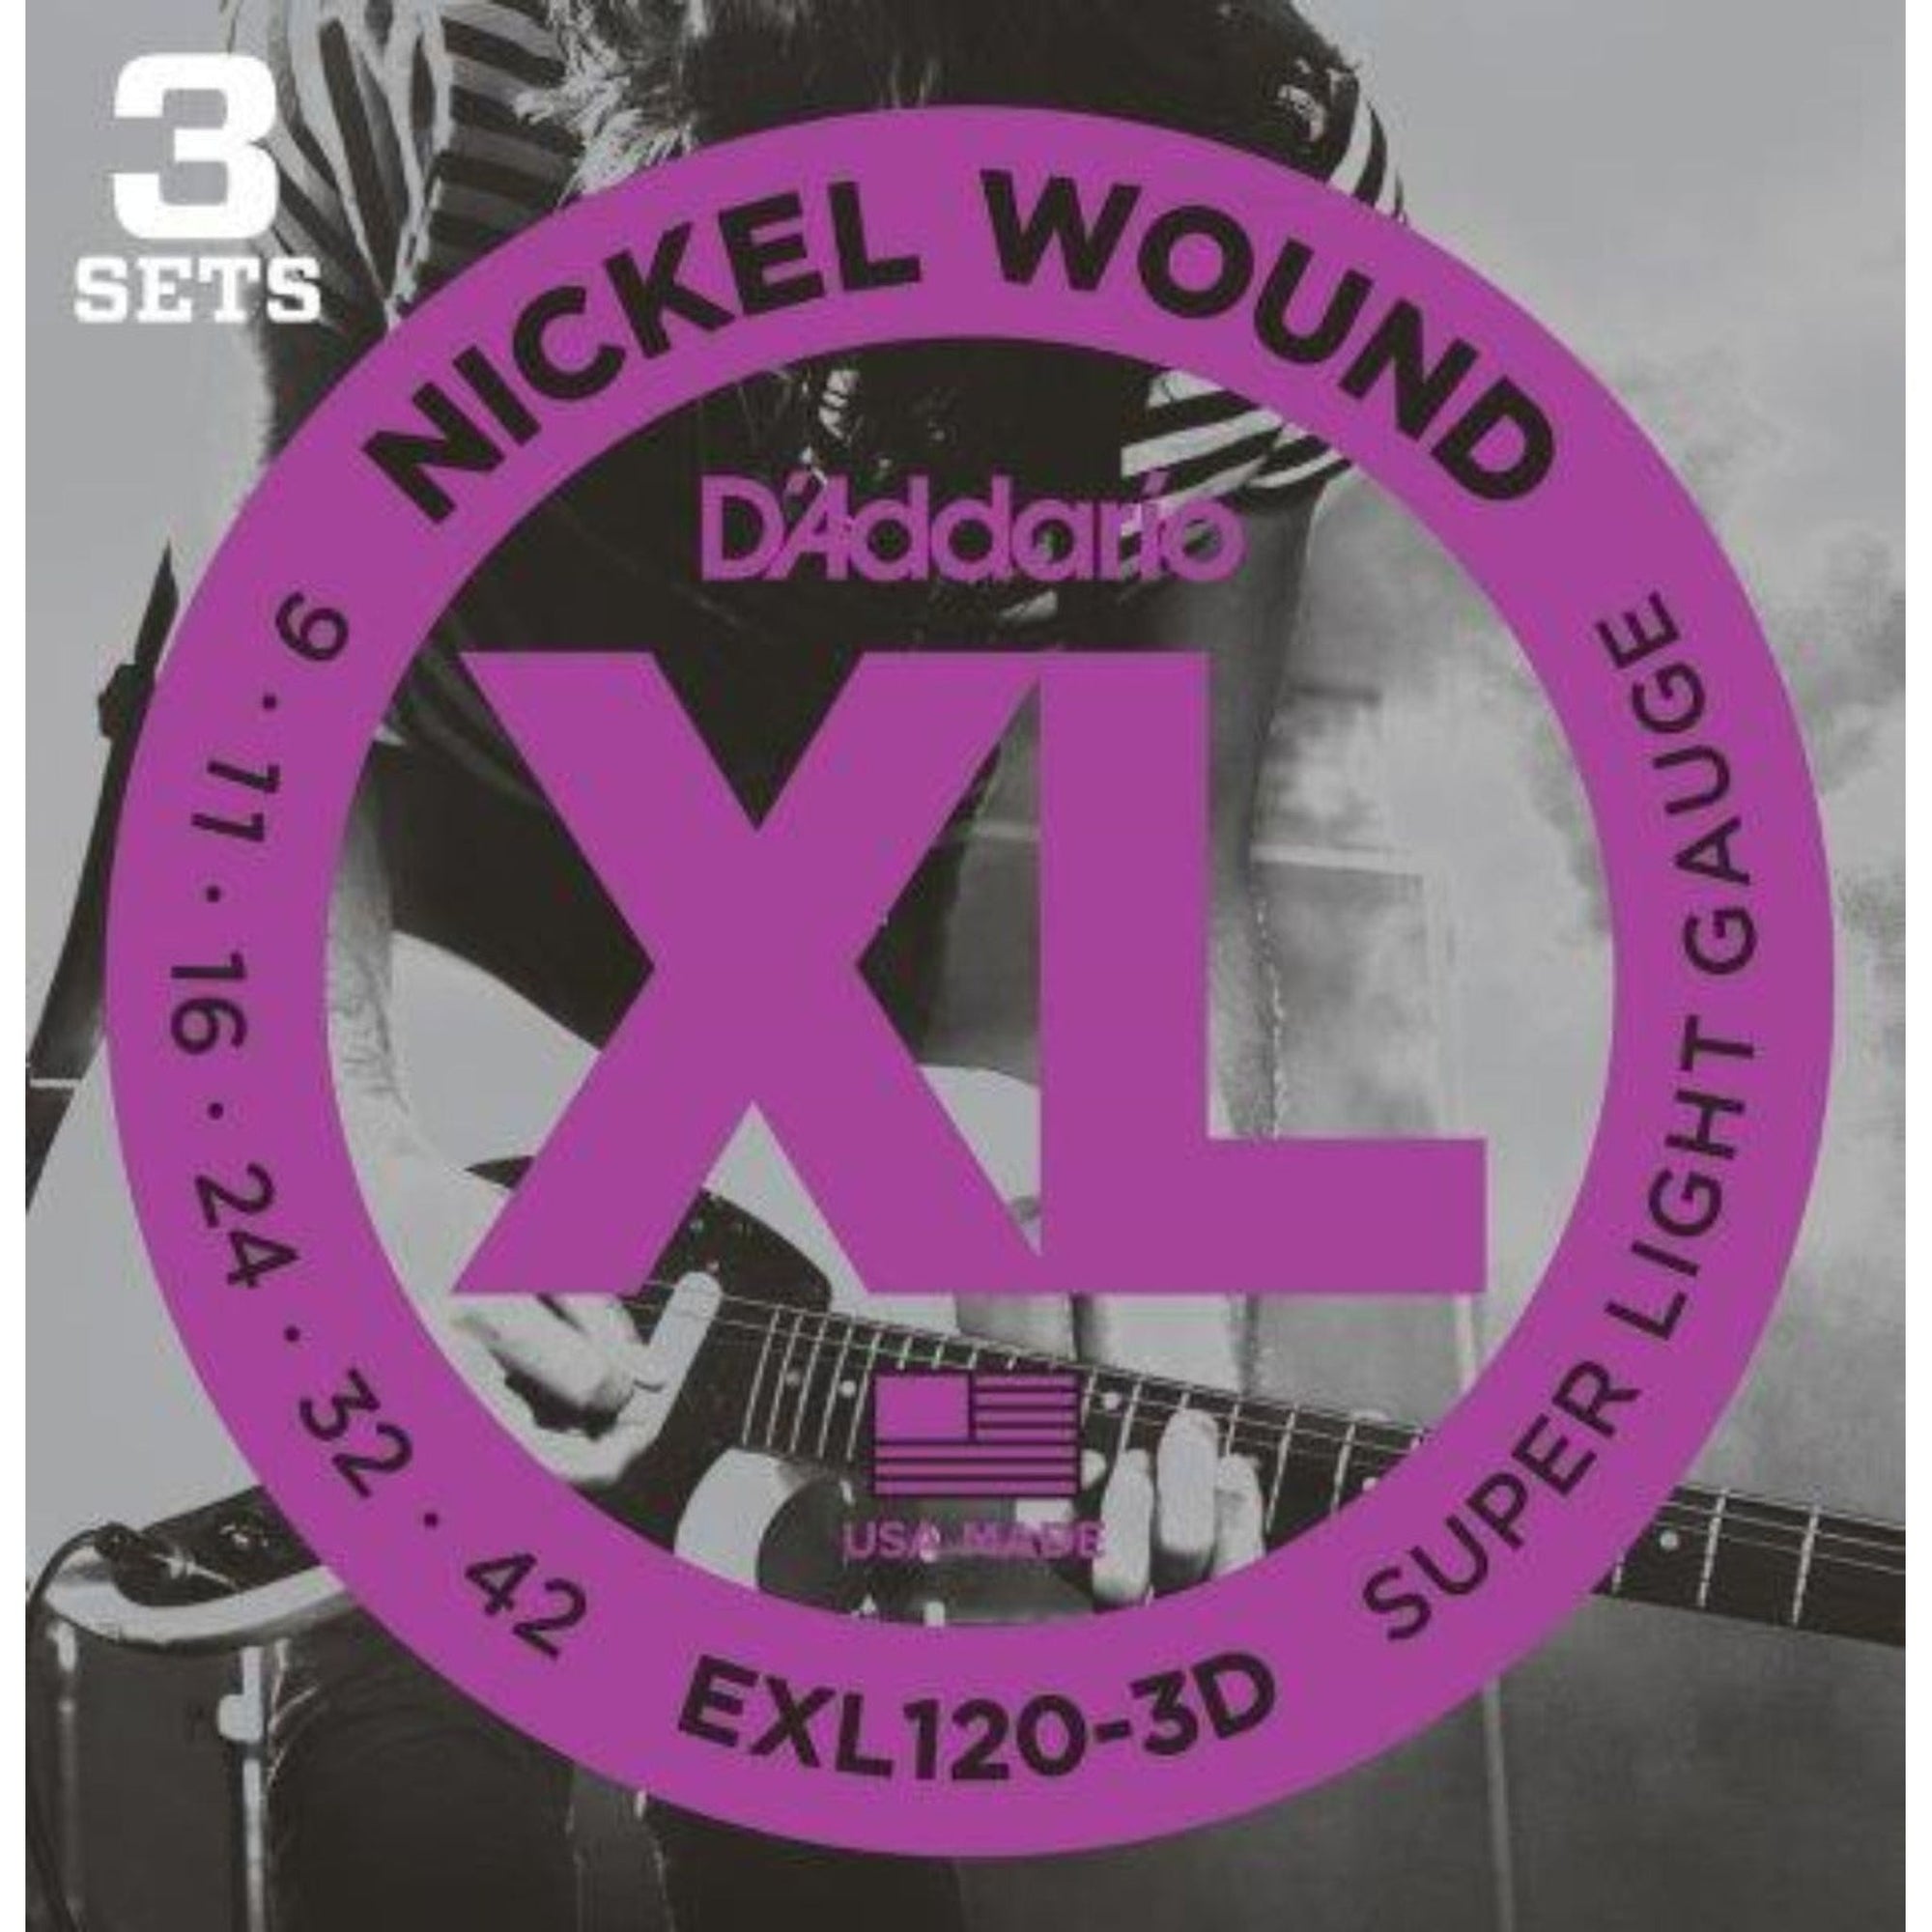 The D'Addario EXL120 Electric Guitar Strings are one of D'Addario's best selling sets, delivers super flexibility and biting tone.